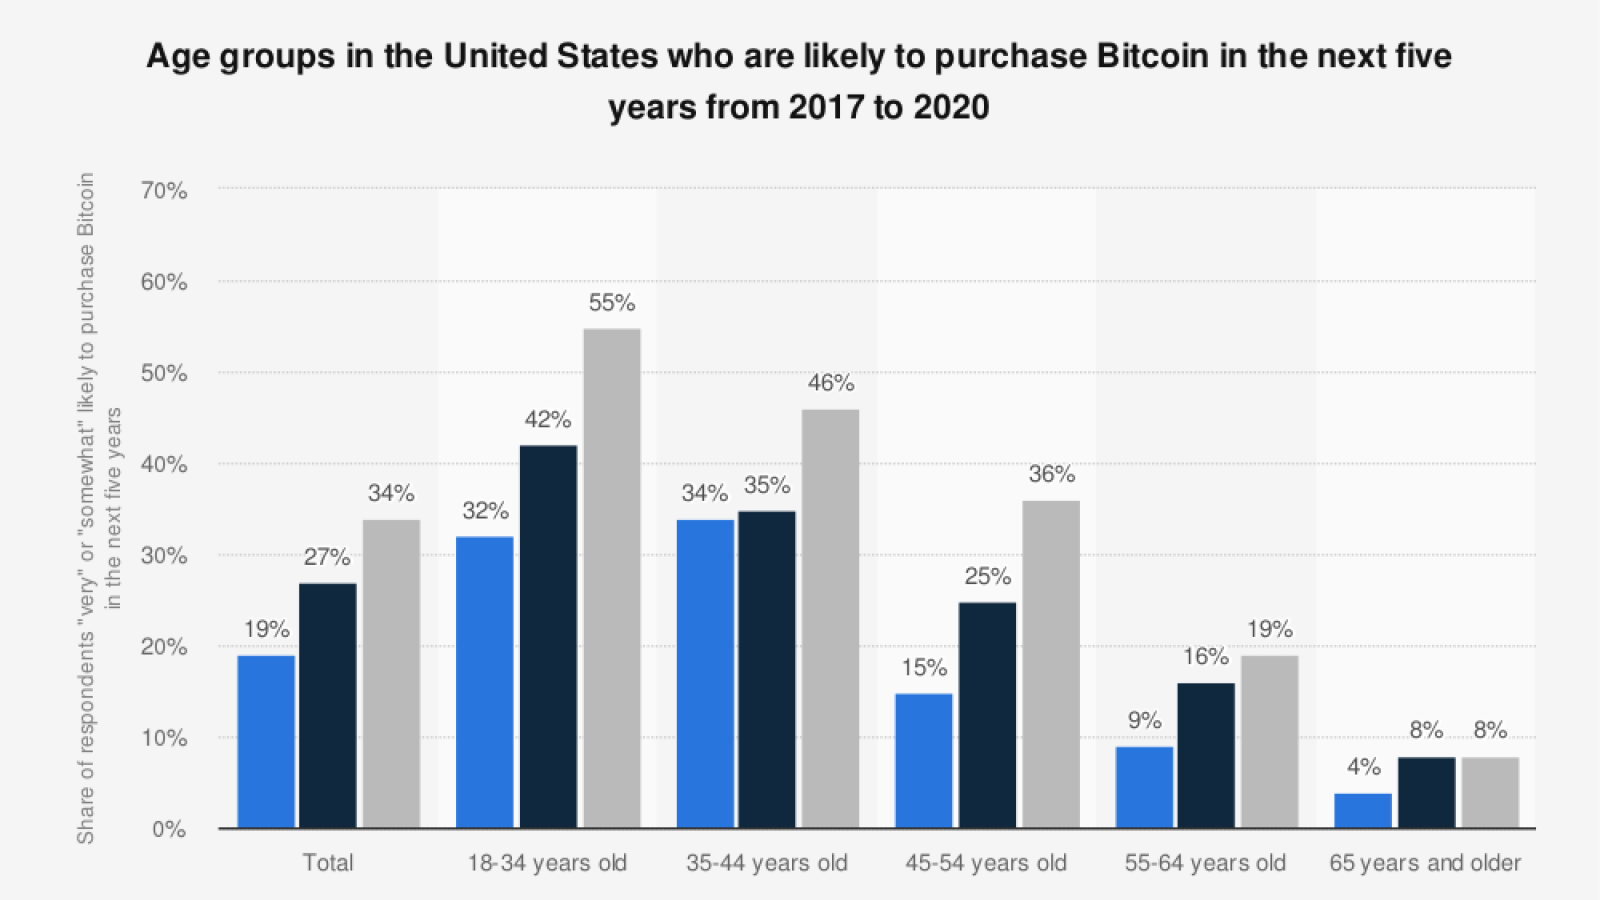 Bar chart shows increasing willingness to by Bitcoin by age group